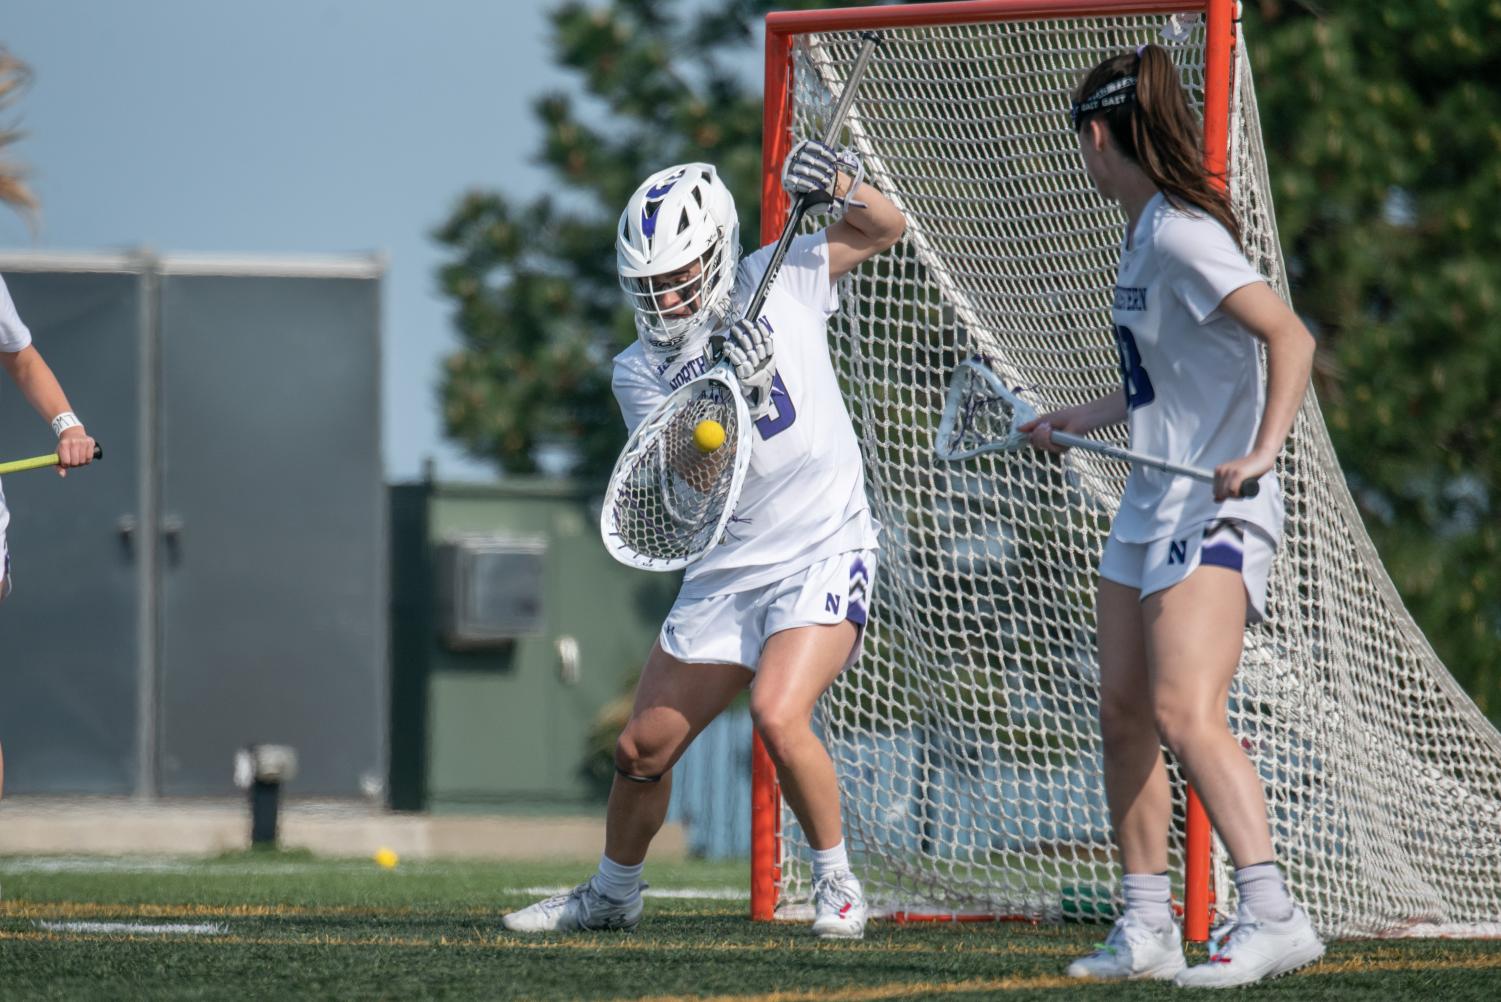 A player in a white jersey holding a goalie lacrosse stick makes a save.